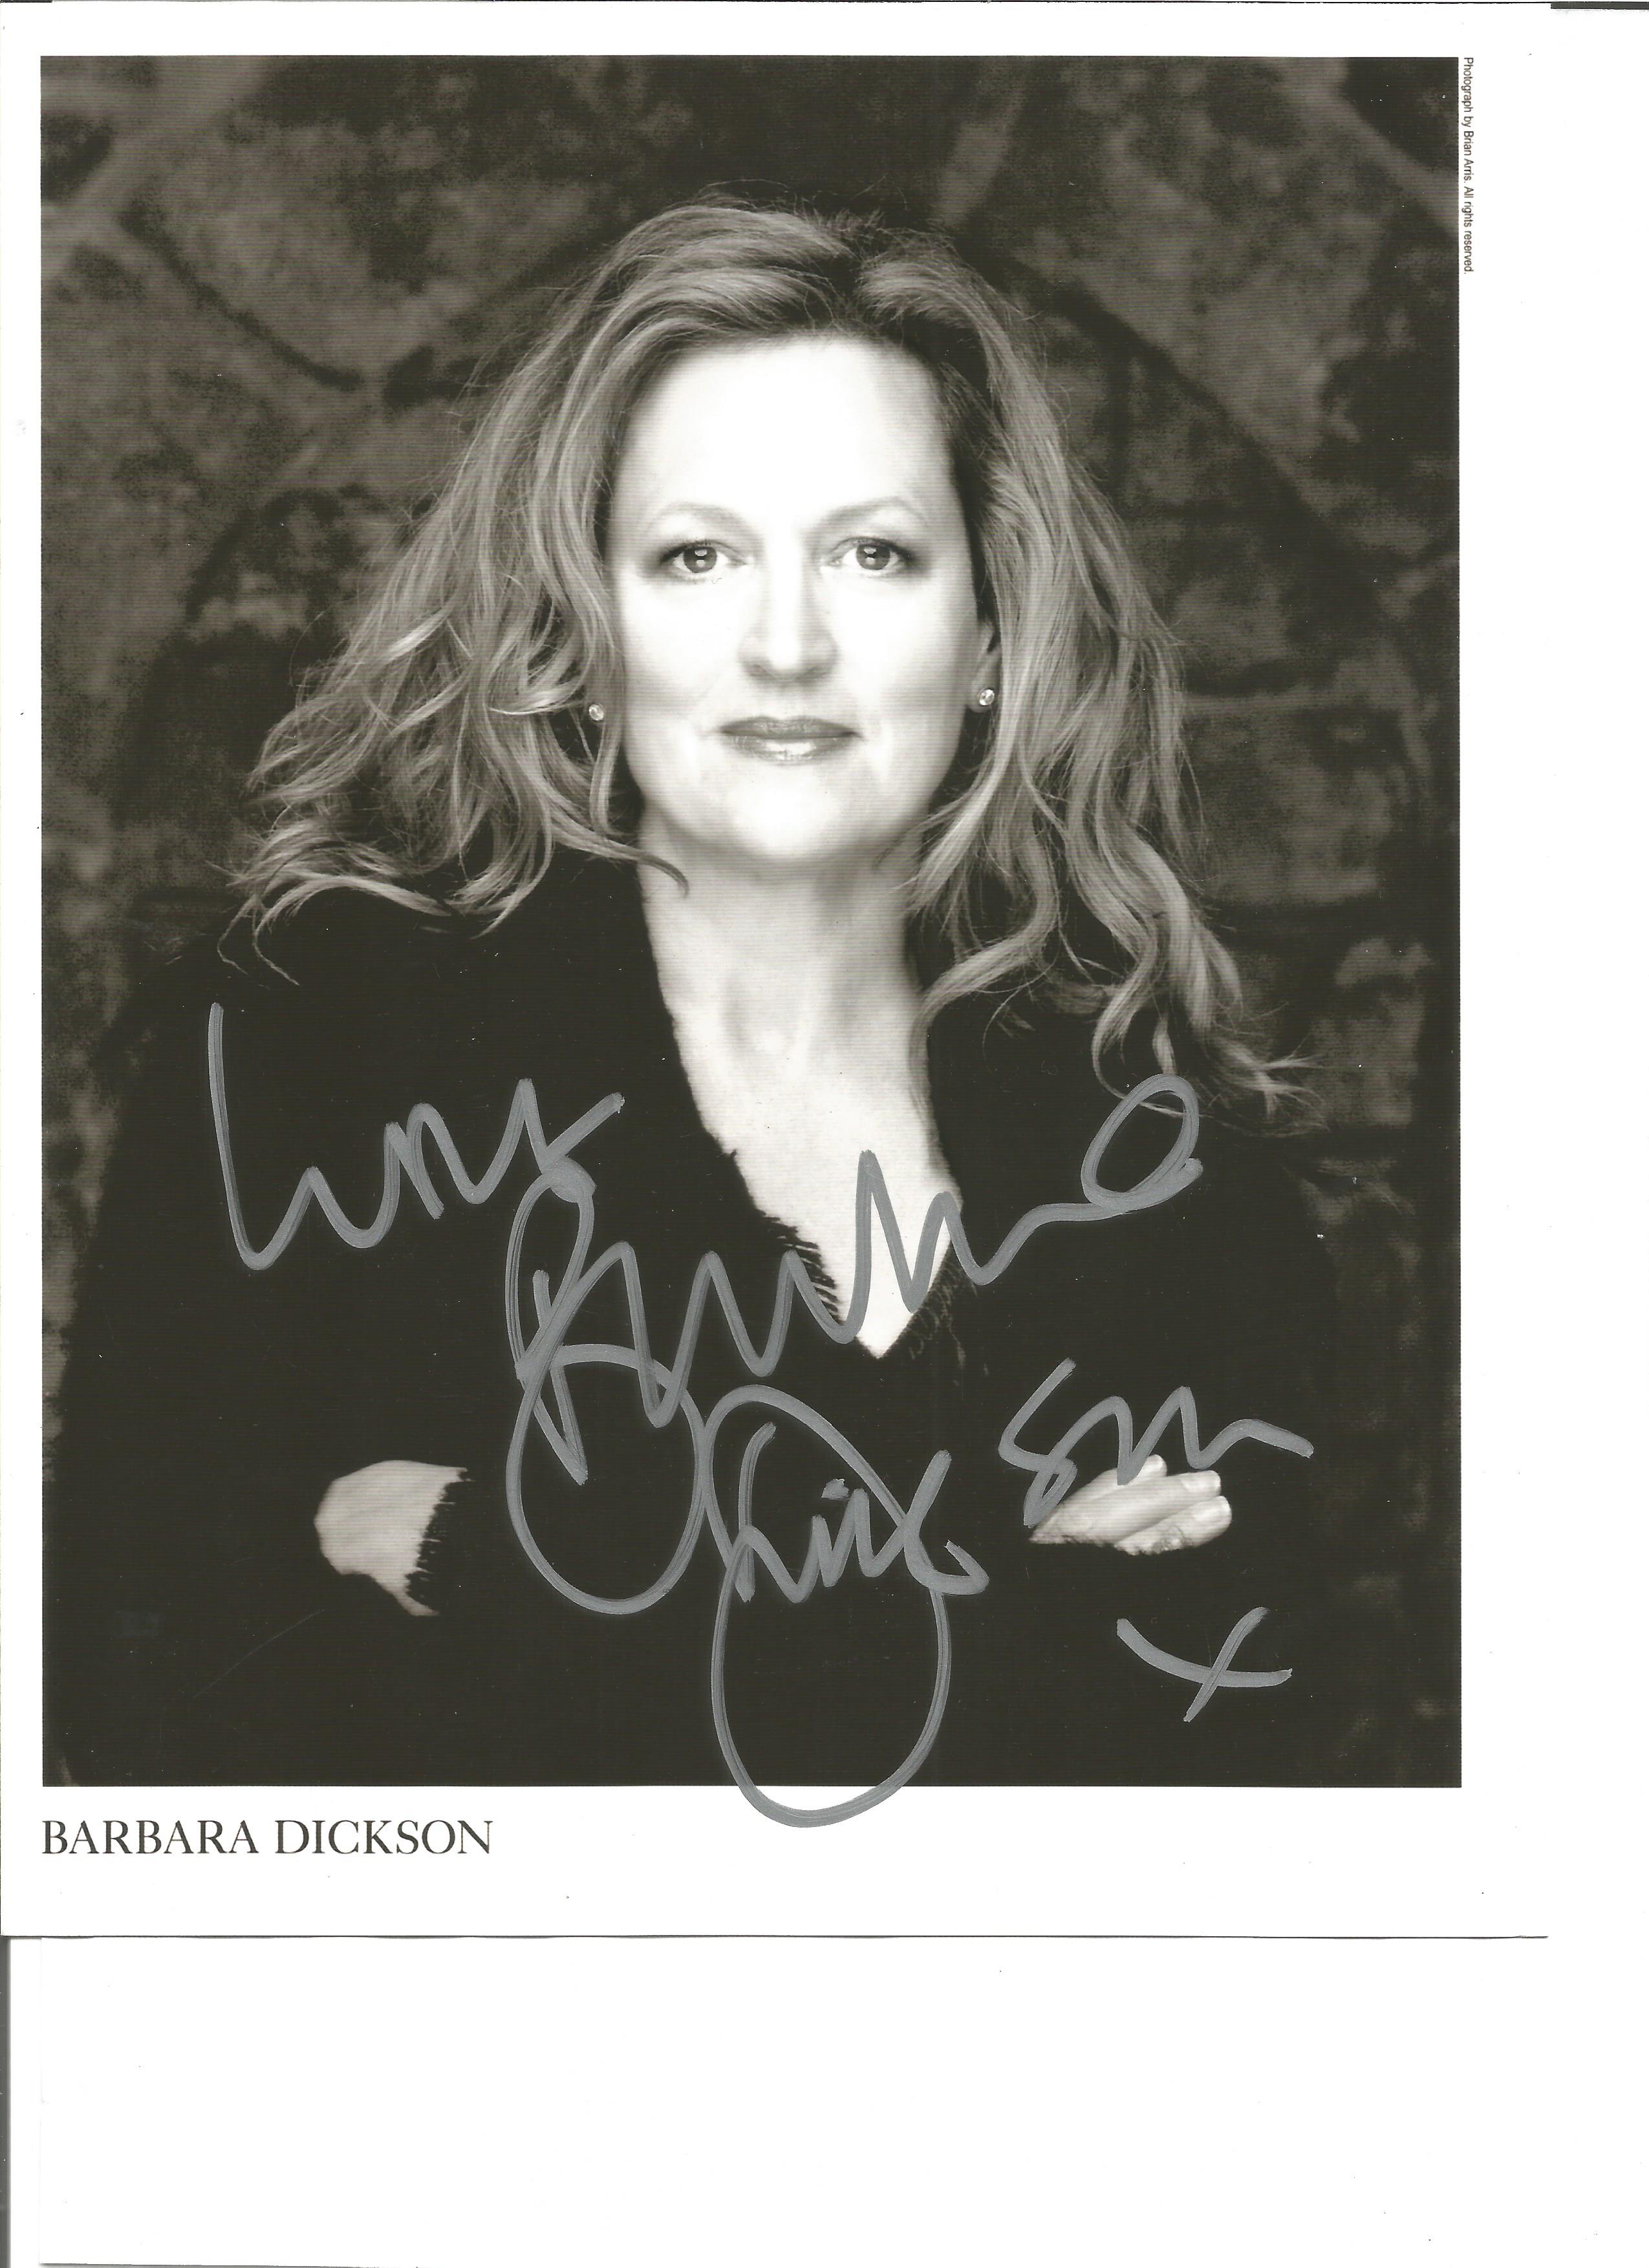 Barbara Dickson Singer Signed 8x10 Promo music Photo. Good Condition. All autographs are genuine